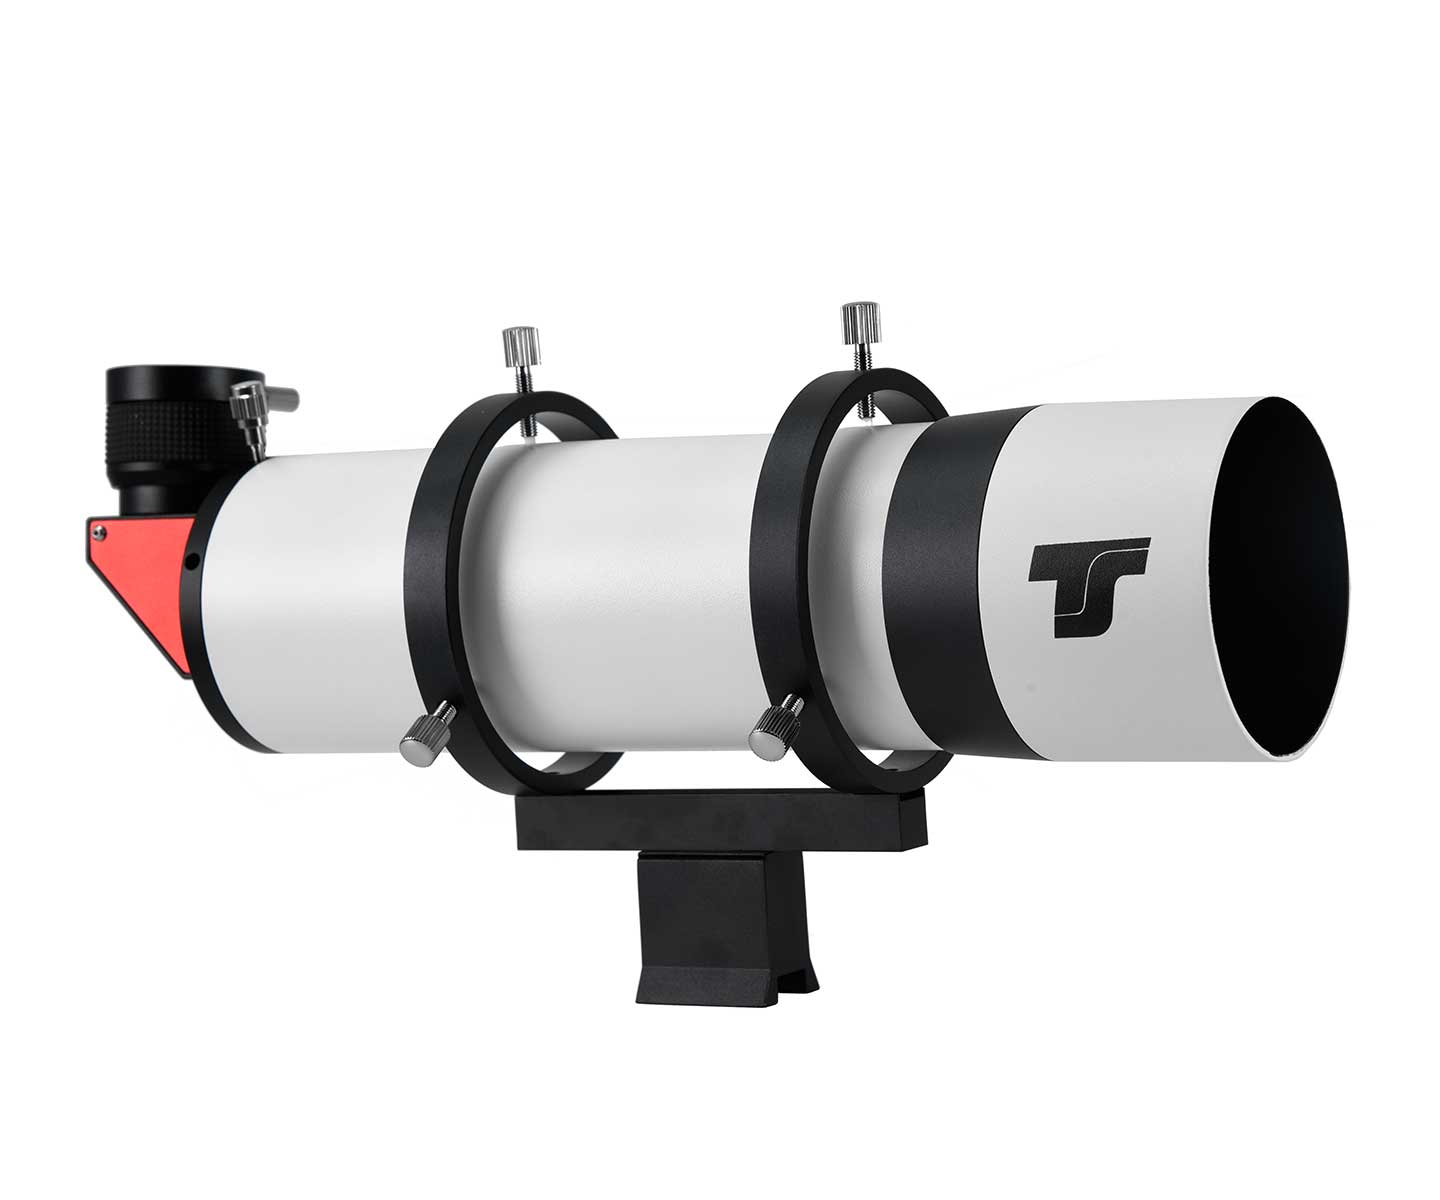 
TS-Optics 80 mm angled finder and guide scope with 90° view - 1.25" and T2 connector [EN]
